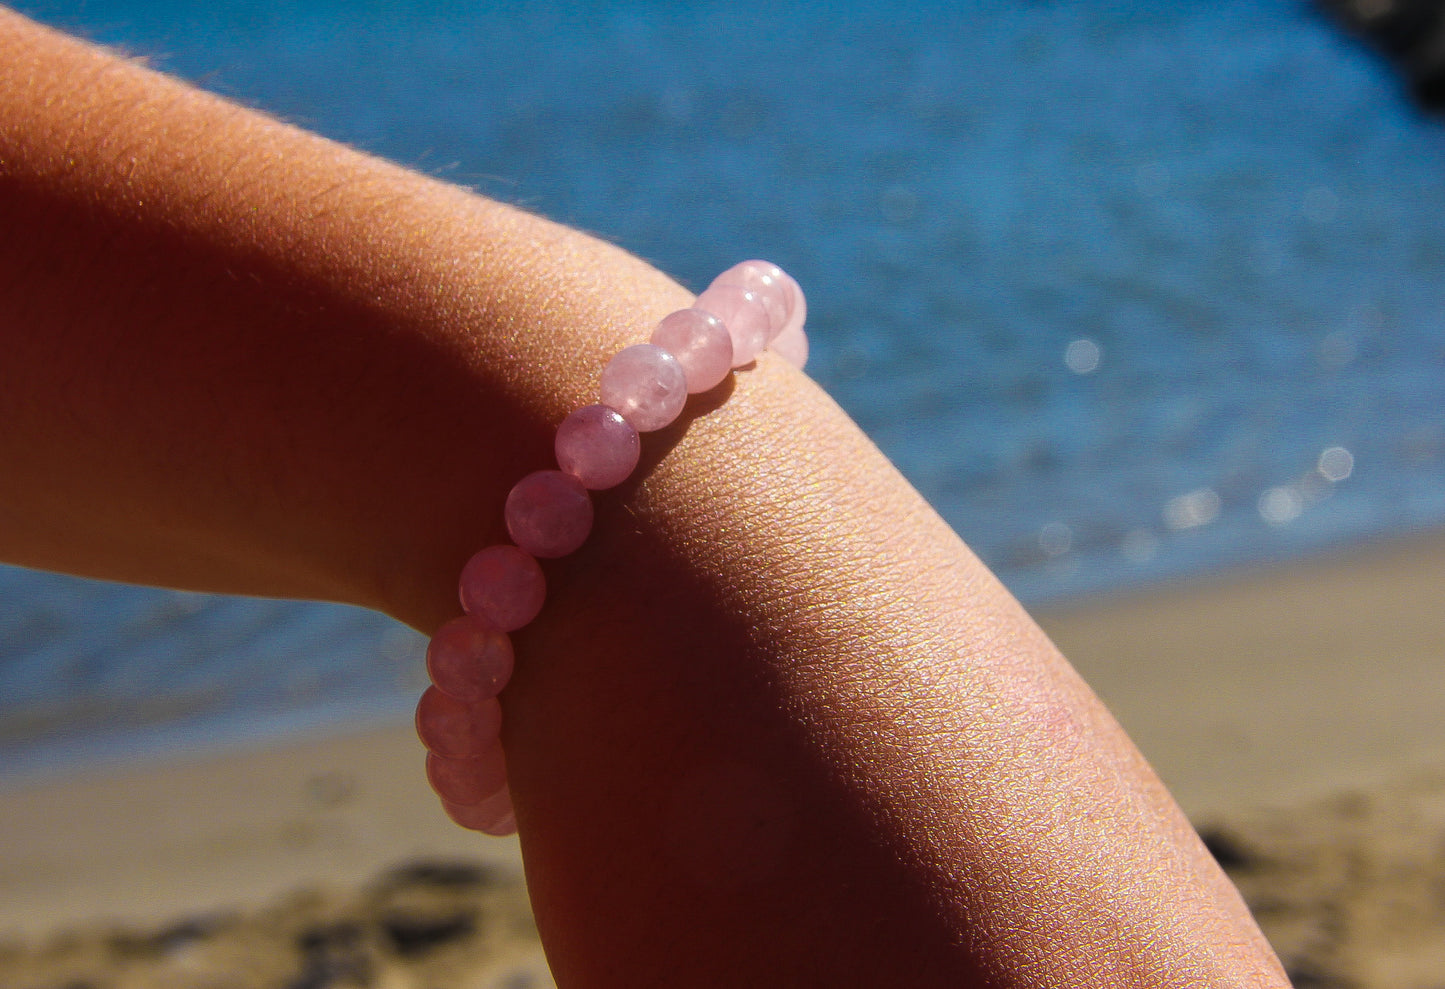 Close up of model's wrist wearing a pink gemstone beaded bracelet. Beach and blue sea in the background.